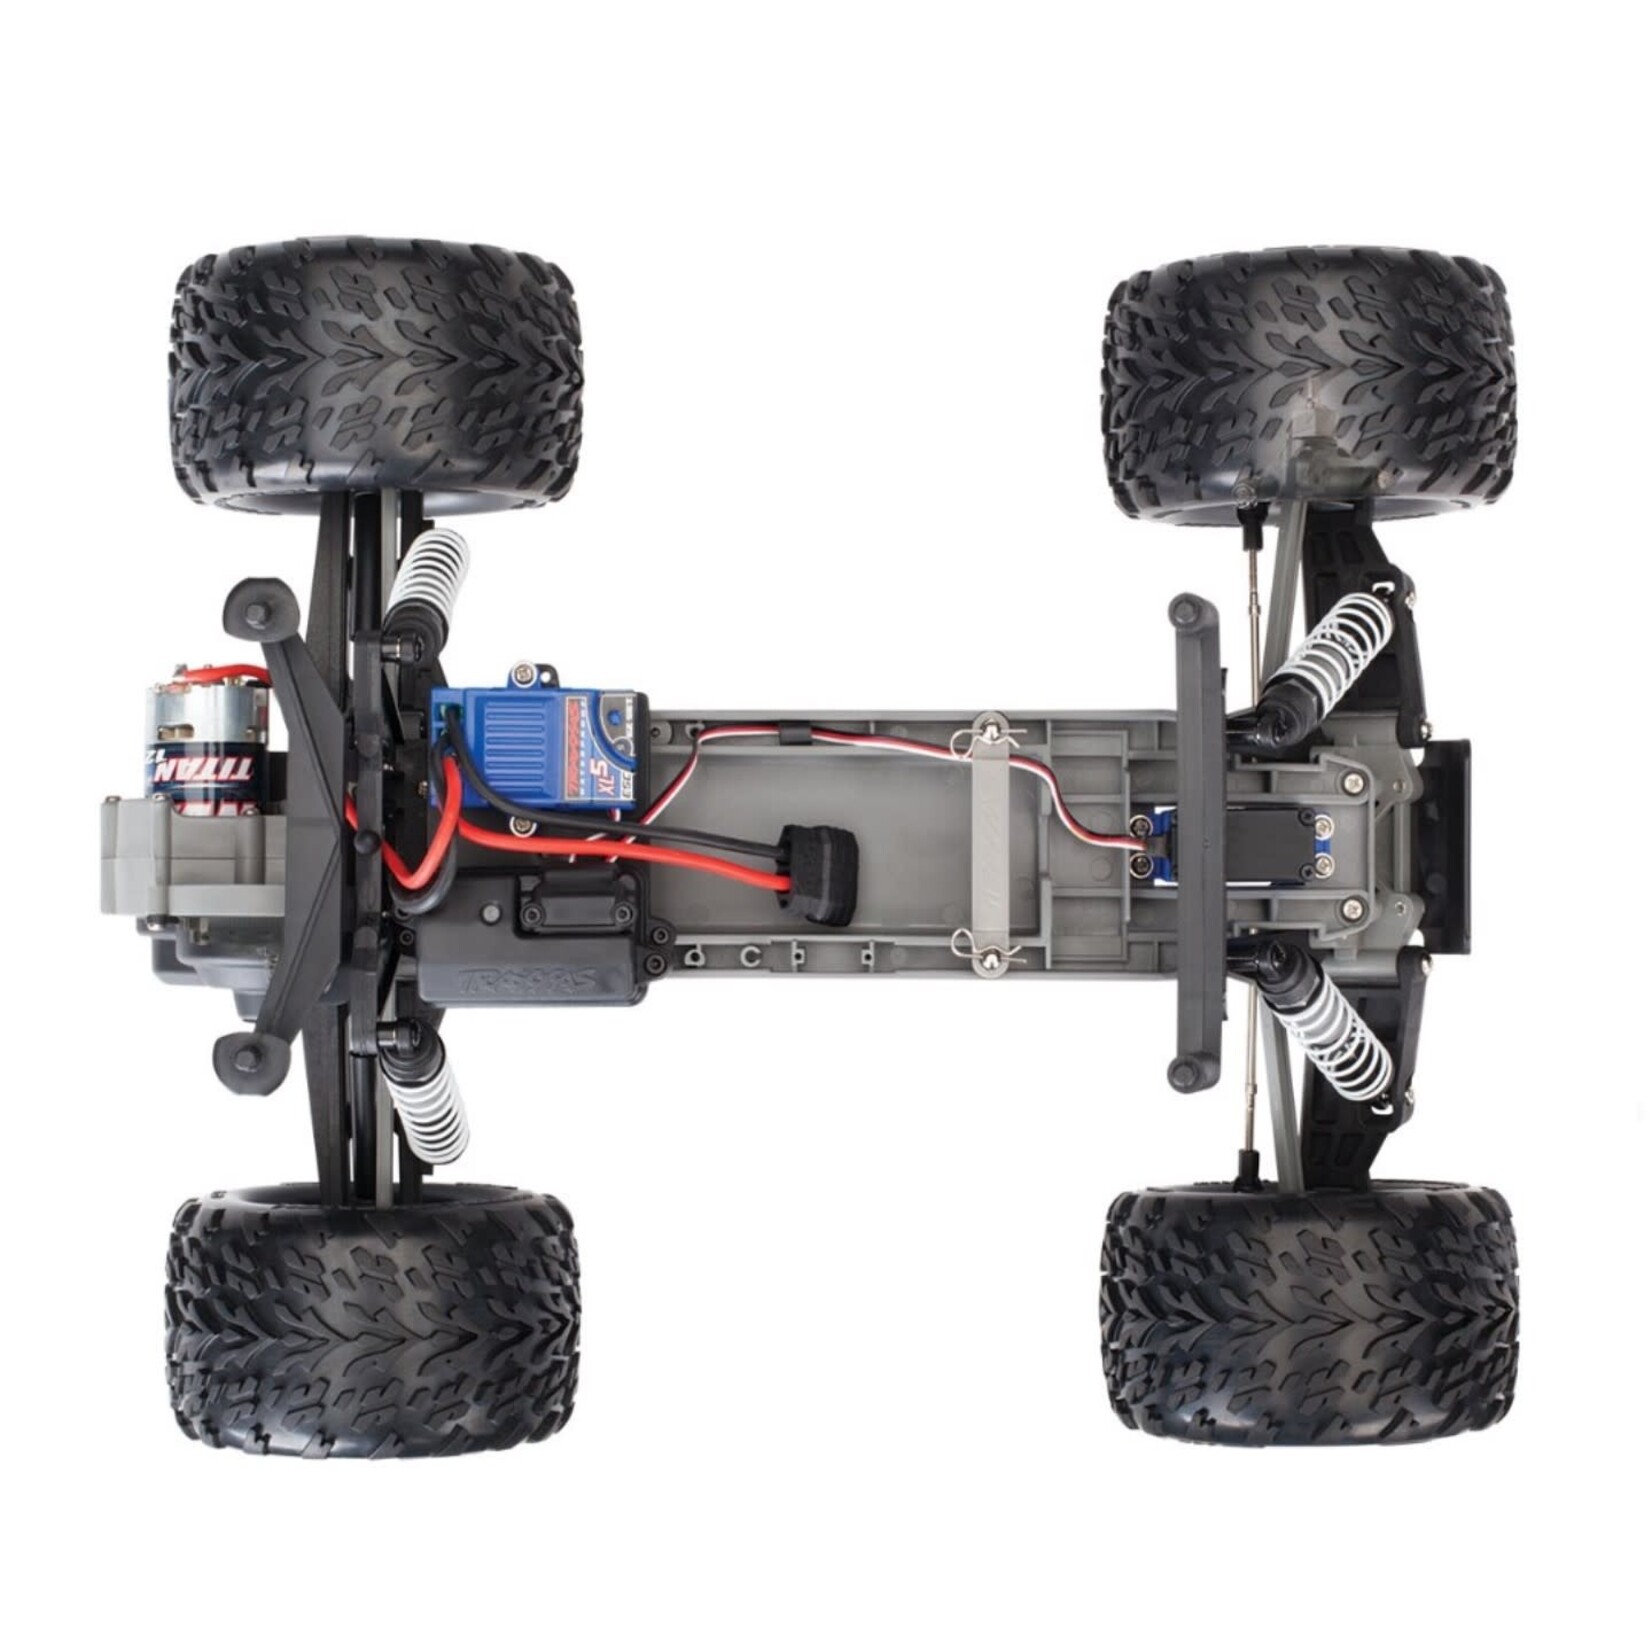 Traxxas 1/10 Stampede 2WD XL-5 Brushed (No Batt or Charger) Blue - Clearance